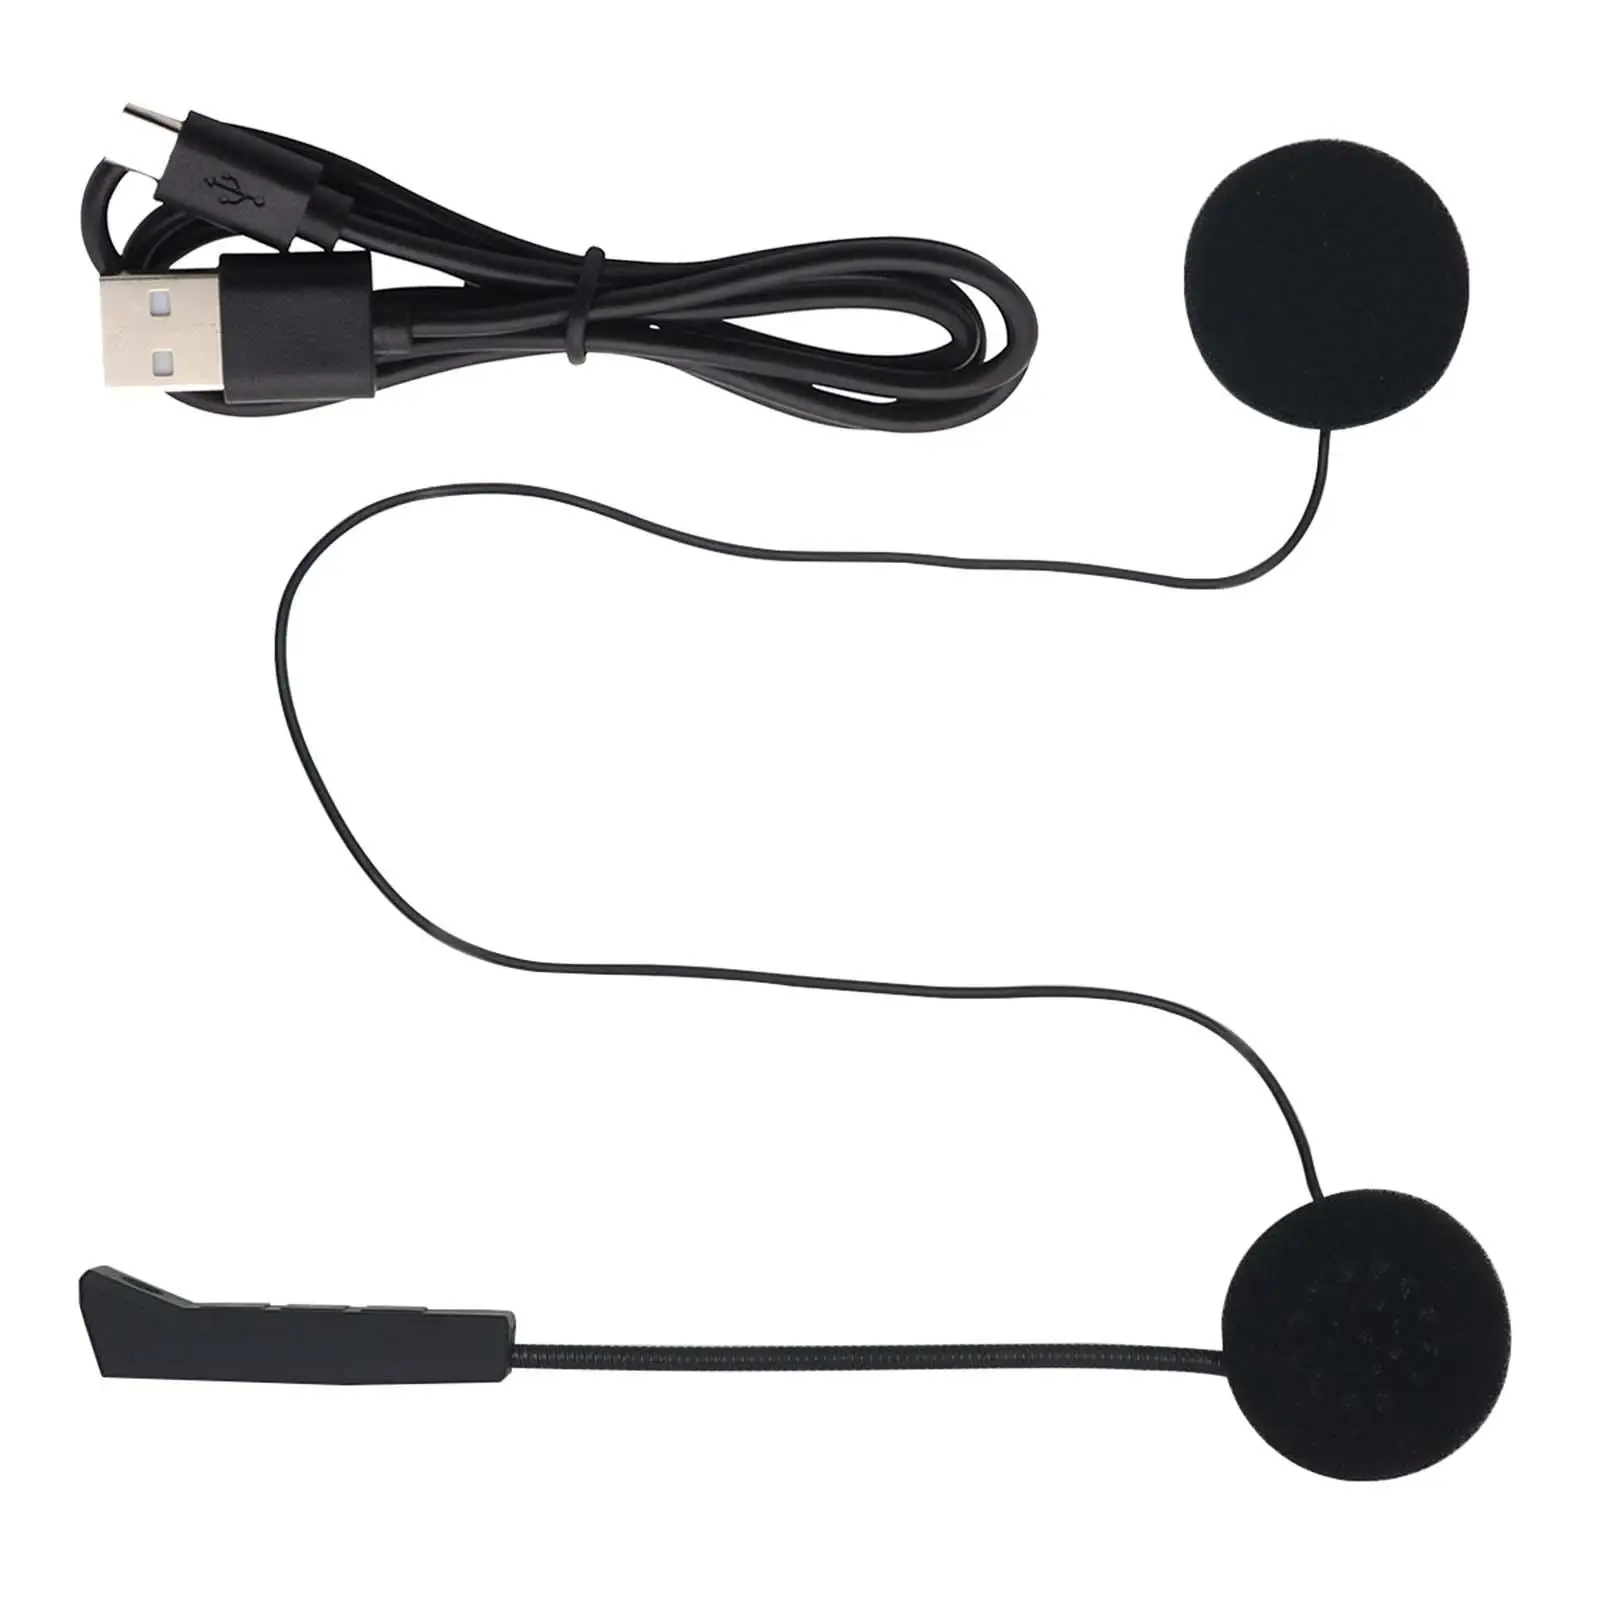 Universal Motorcycle Helmet Headset Hands Free Call for Motorcycle Riding Large Battery Capacity Built in Microphone Earphones